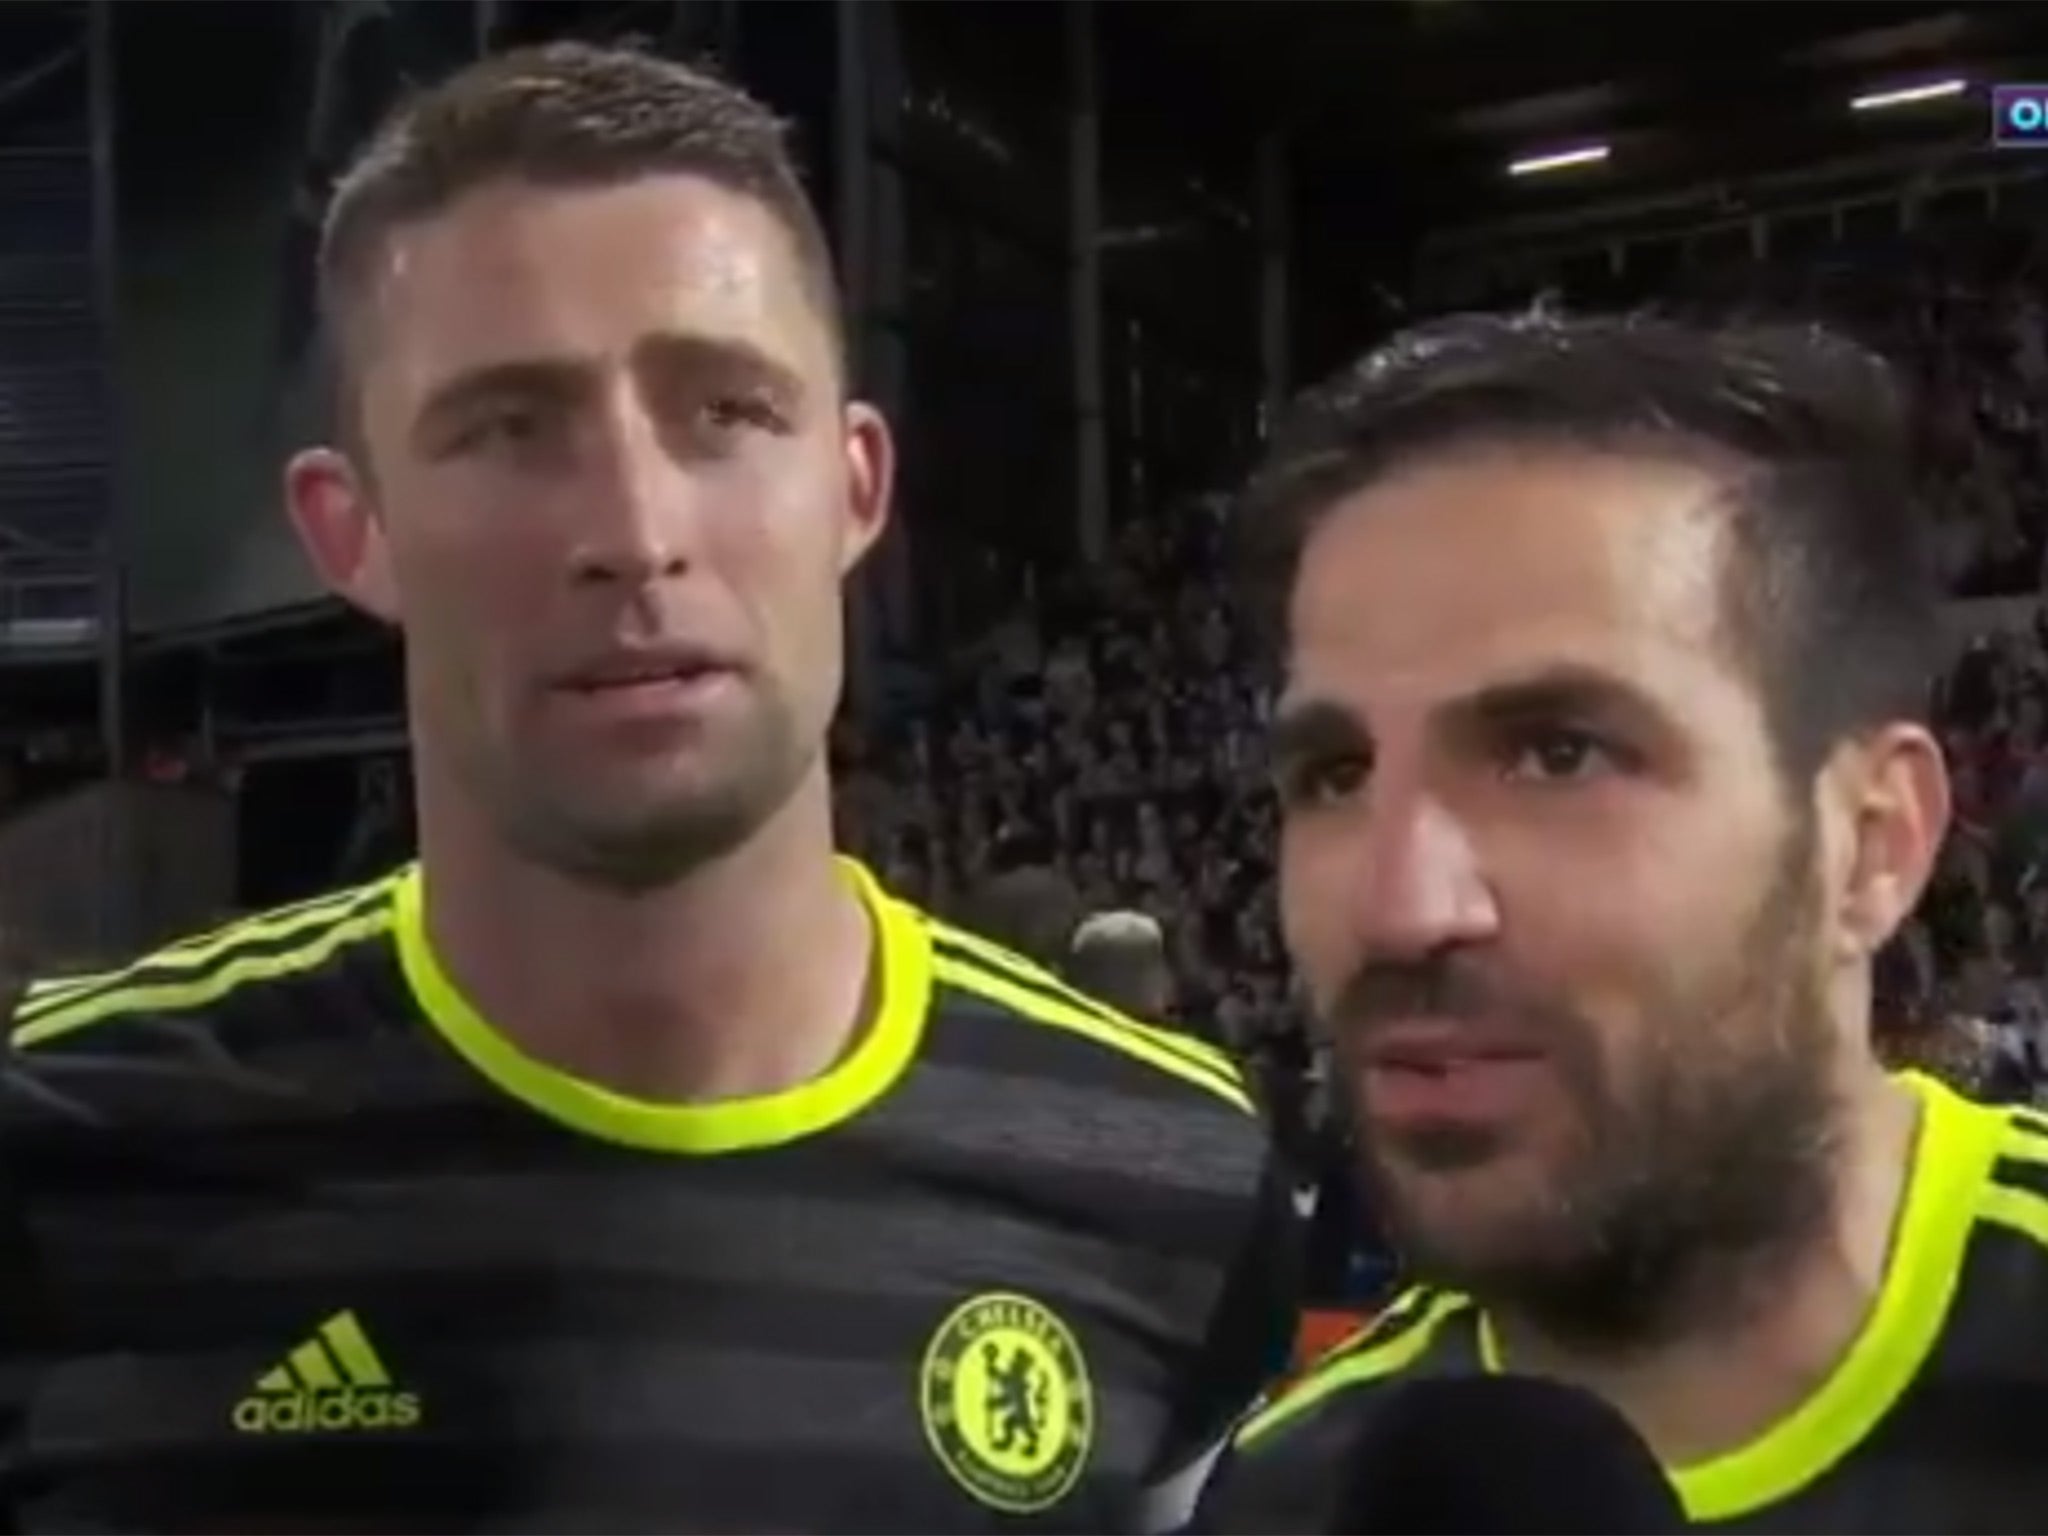 Chelsea's Cesc Fabregas allowed the moment to get the better of him